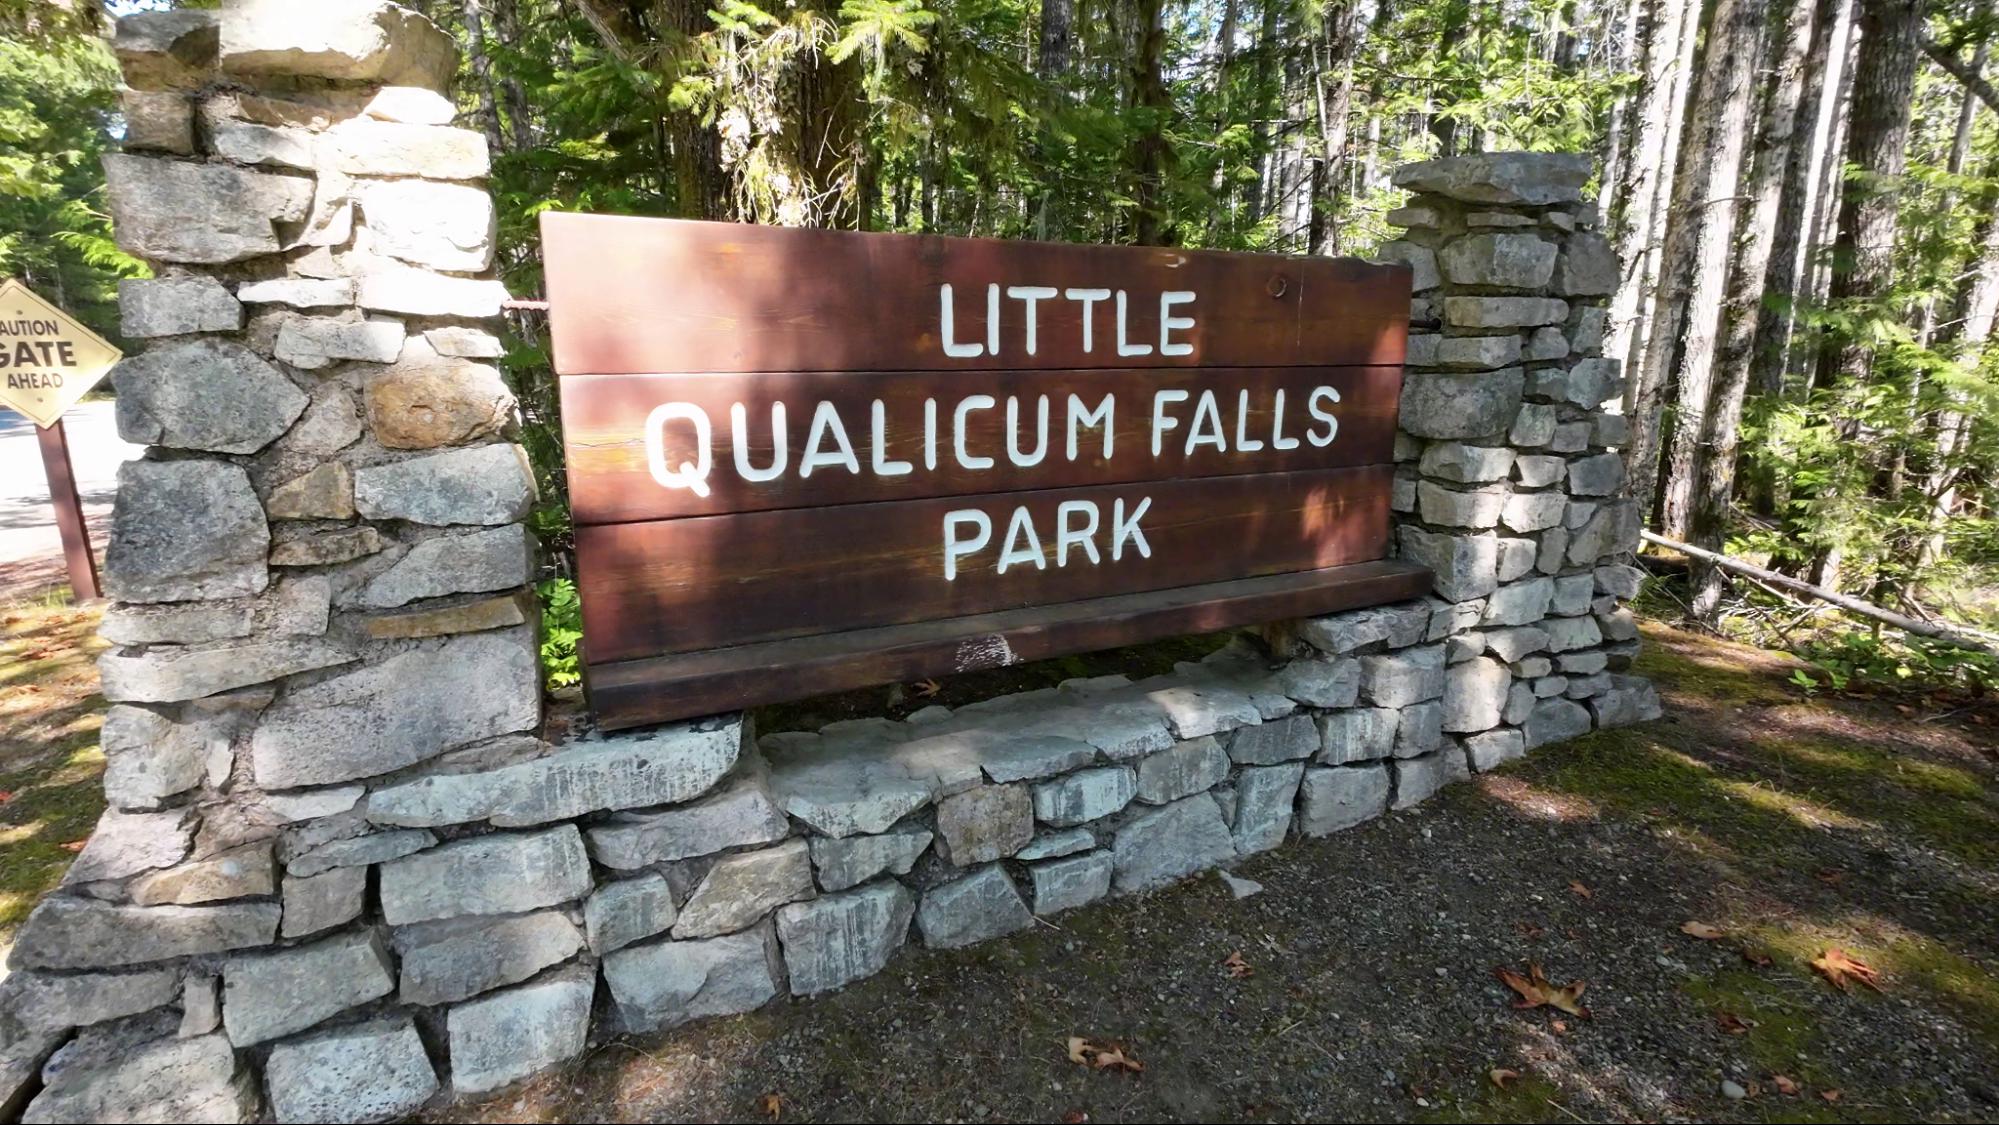 The sign at the entrance of Little Qualicum Falls Park